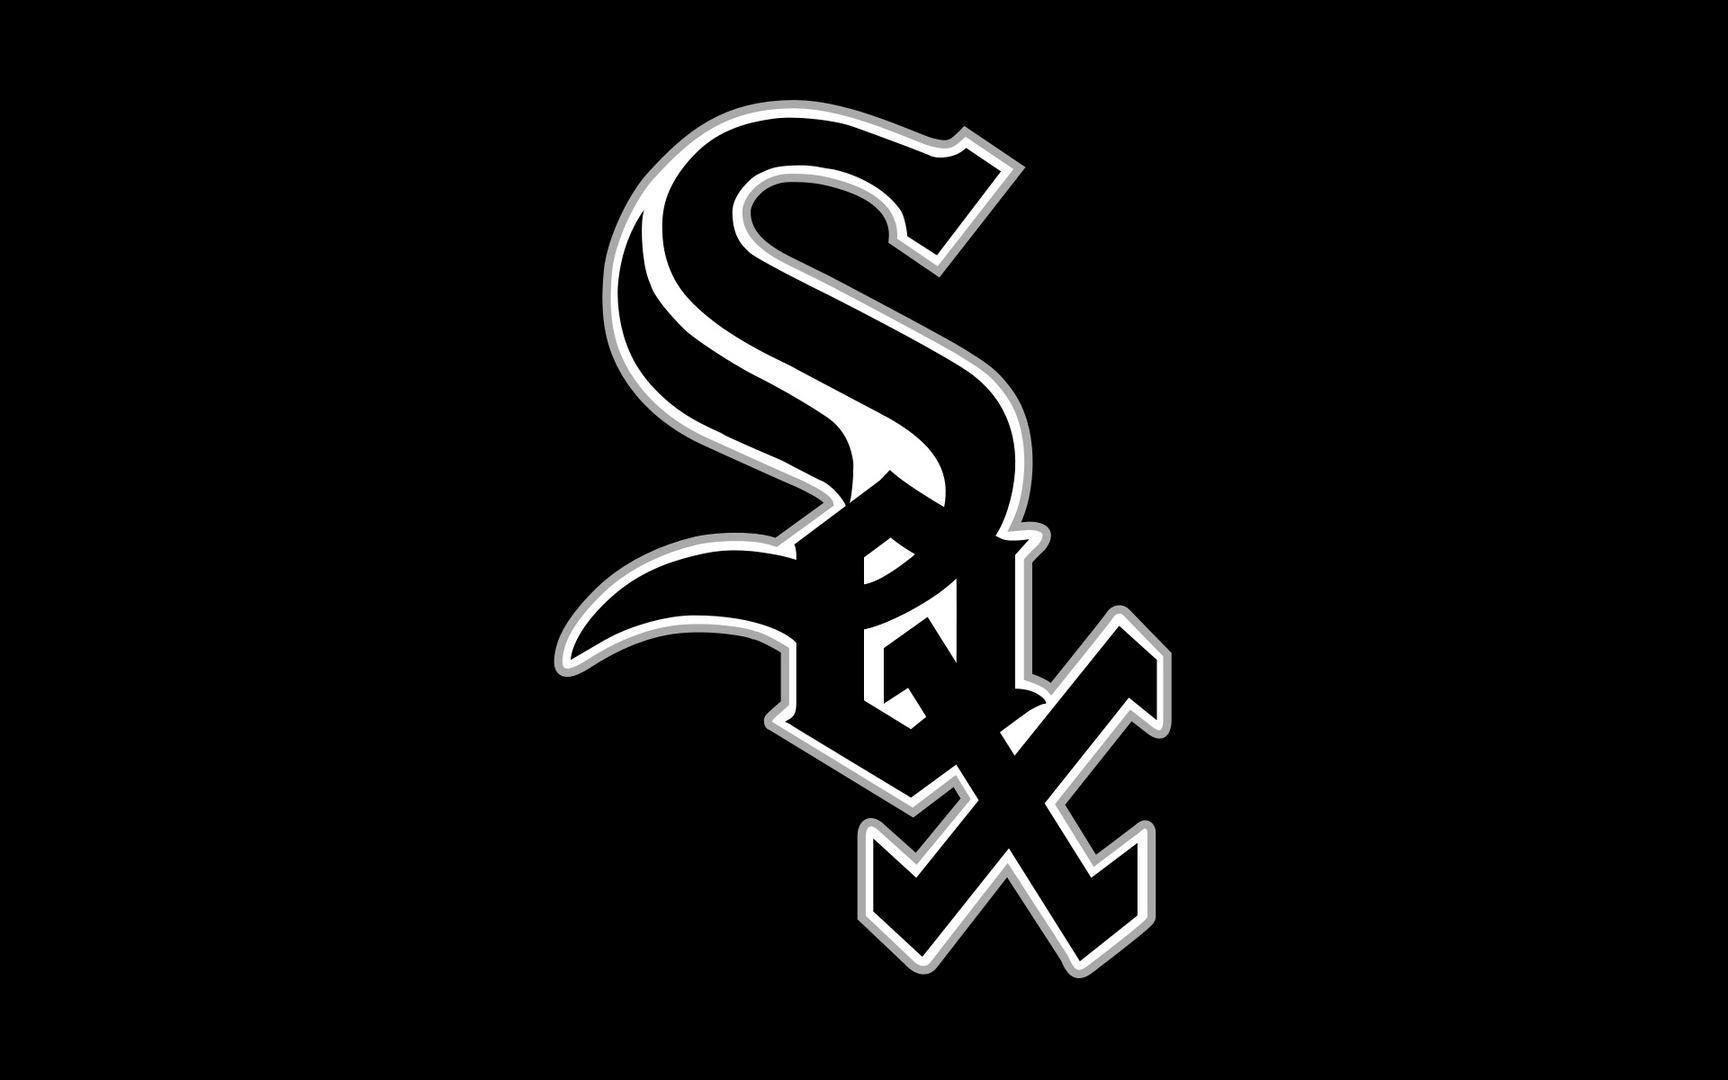 Chicago White Sox wallpapers hd free download